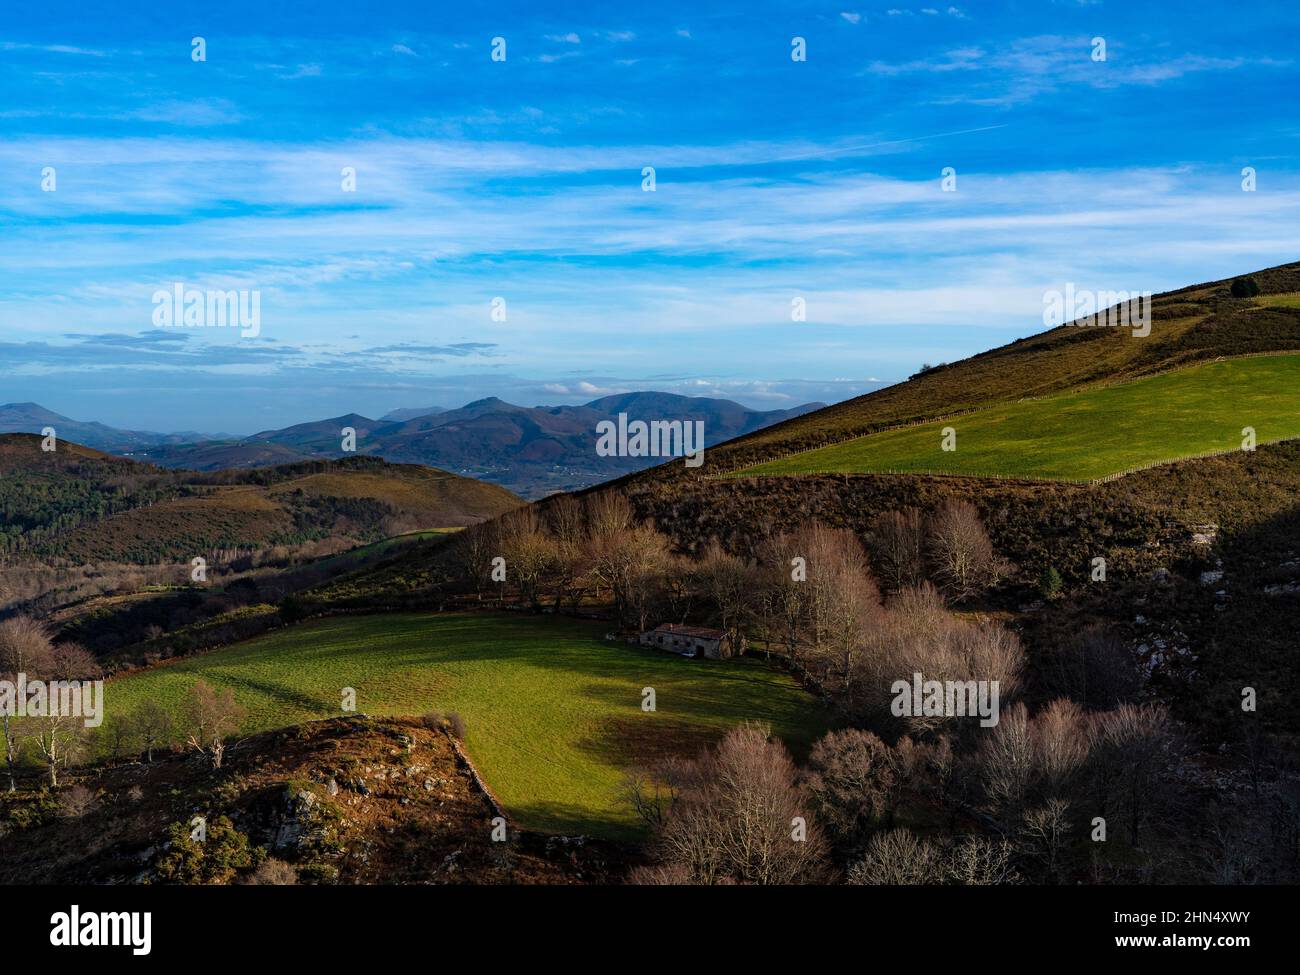 View from La Rhune, Ascain, Pays Basque, France Stock Photo